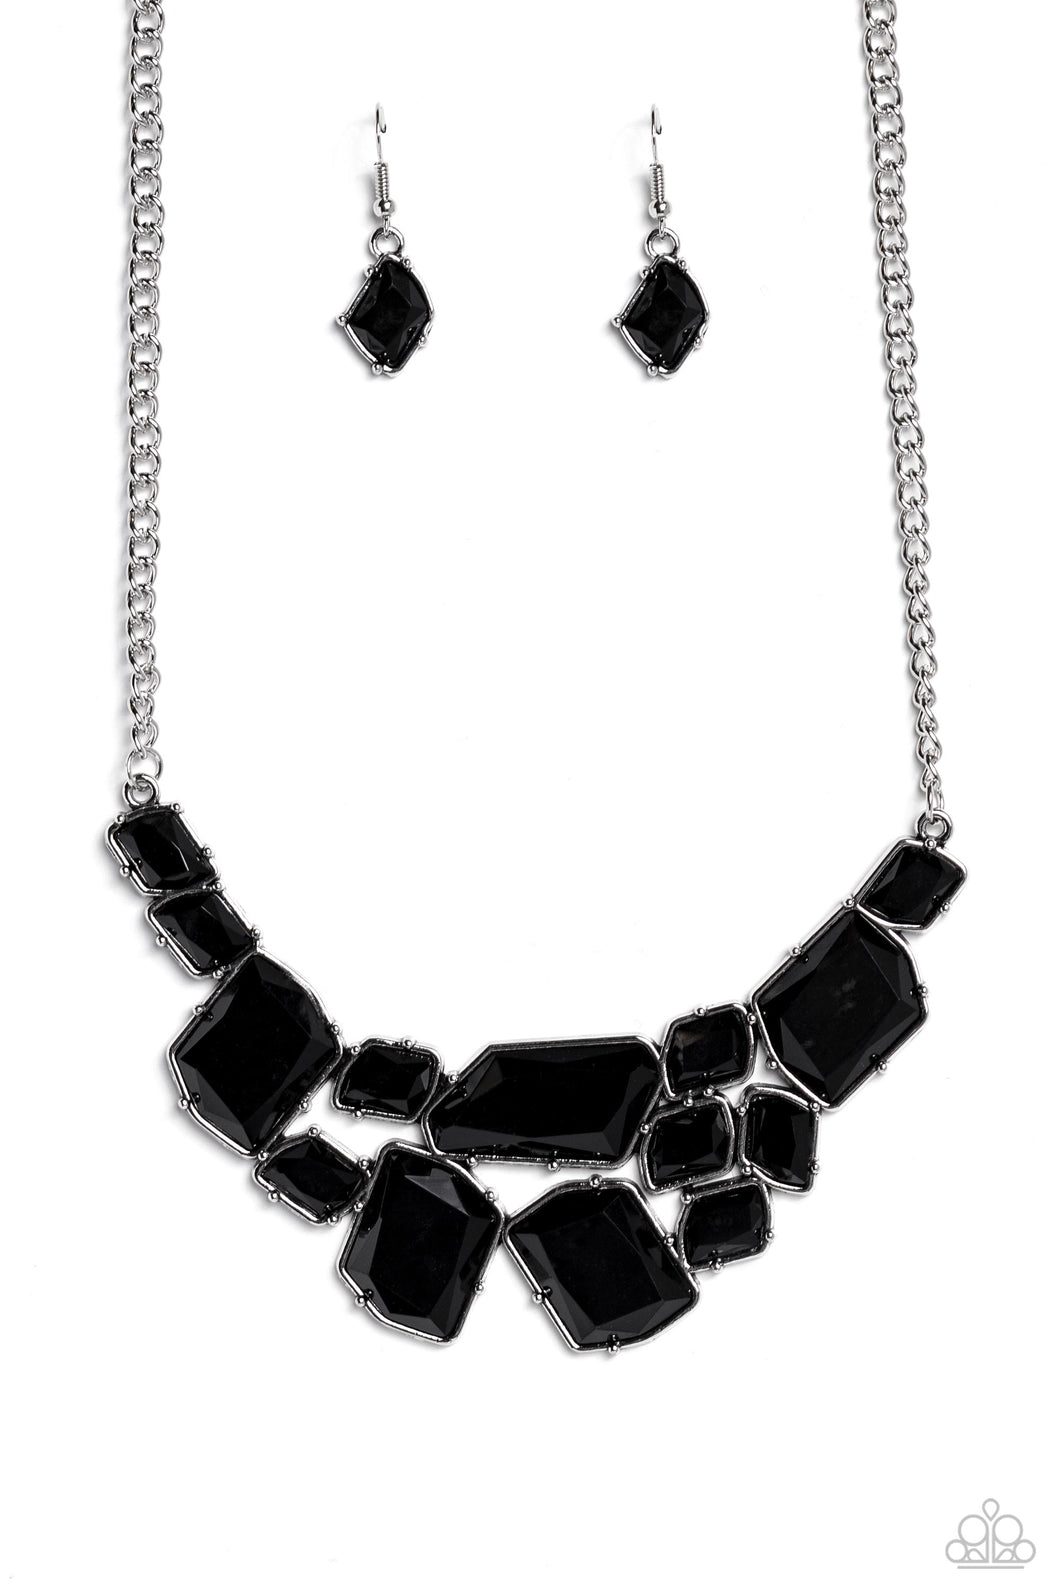 Paparazzi Necklace Energetic Embers - Black Coming Soon